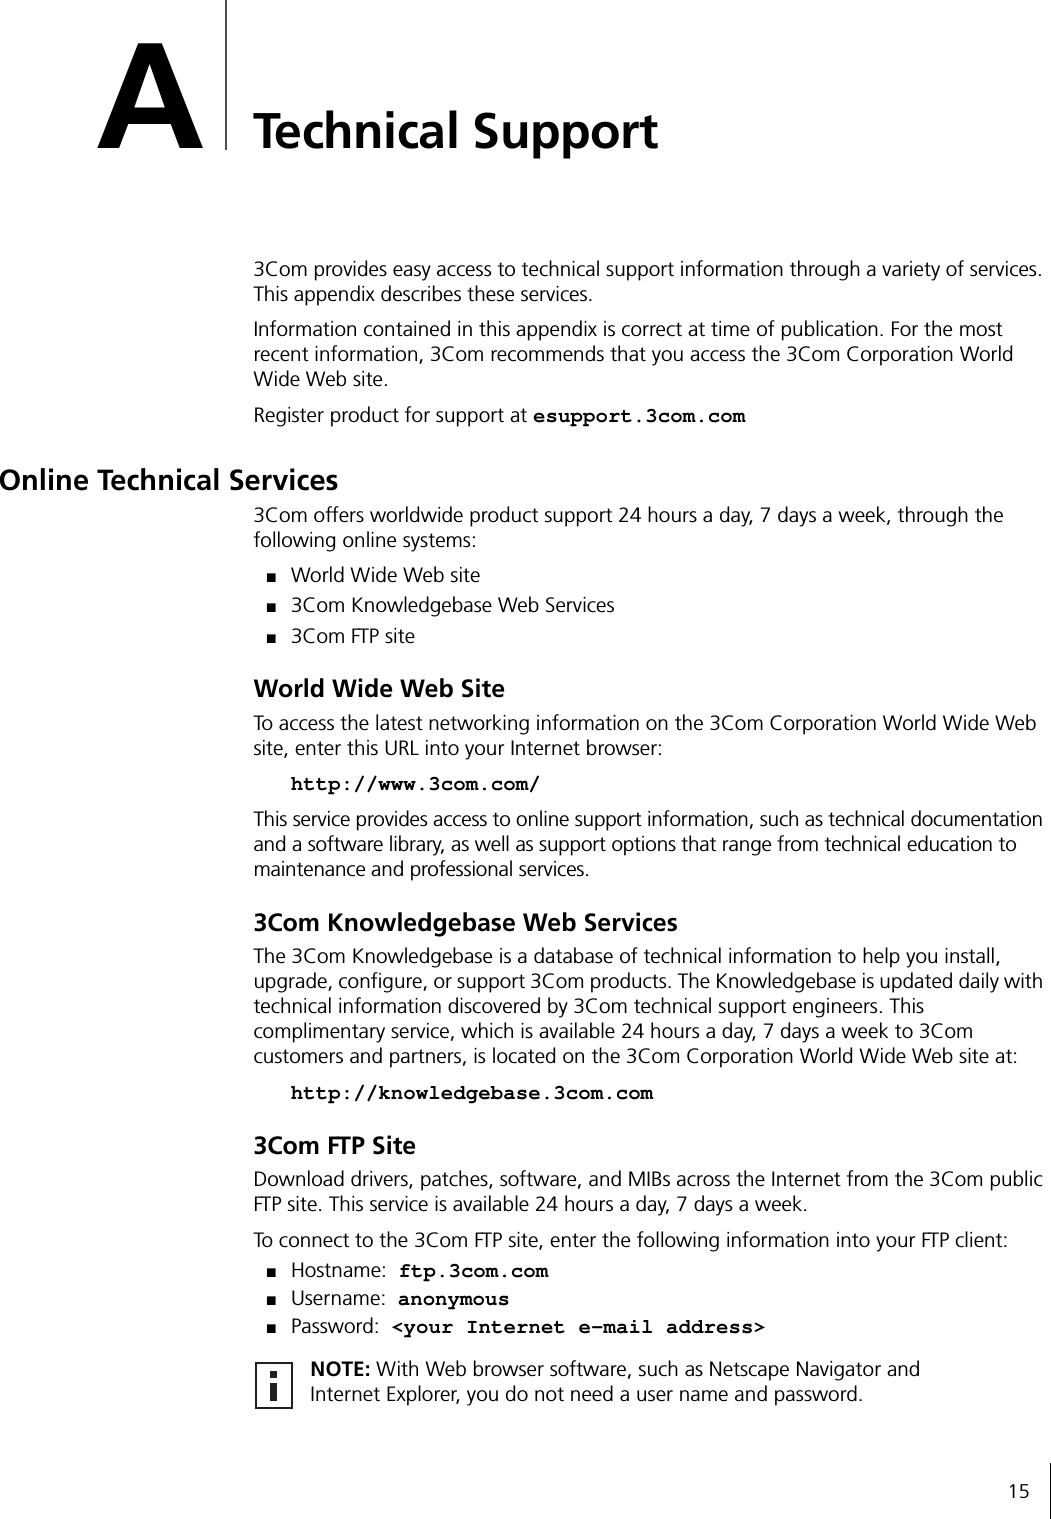 15ATechnical Support3Com provides easy access to technical support information through a variety of services. This appendix describes these services.Information contained in this appendix is correct at time of publication. For the most recent information, 3Com recommends that you access the 3Com Corporation World Wide Web site.Register product for support at esupport.3com.comOnline Technical Services3Com offers worldwide product support 24 hours a day, 7 days a week, through the following online systems:■World Wide Web site■3Com Knowledgebase Web Services■3Com FTP siteWorld Wide Web SiteTo access the latest networking information on the 3Com Corporation World Wide Web site, enter this URL into your Internet browser:http://www.3com.com/This service provides access to online support information, such as technical documentation and a software library, as well as support options that range from technical education to maintenance and professional services.3Com Knowledgebase Web ServicesThe 3Com Knowledgebase is a database of technical information to help you install, upgrade, configure, or support 3Com products. The Knowledgebase is updated daily with technical information discovered by 3Com technical support engineers. This complimentary service, which is available 24 hours a day, 7 days a week to 3Com customers and partners, is located on the 3Com Corporation World Wide Web site at:http://knowledgebase.3com.com3Com FTP SiteDownload drivers, patches, software, and MIBs across the Internet from the 3Com public FTP site. This service is available 24 hours a day, 7 days a week.To connect to the 3Com FTP site, enter the following information into your FTP client:■Hostname: ftp.3com.com■Username: anonymous■Password: &lt;your Internet e-mail address&gt;NOTE: With Web browser software, such as Netscape Navigator and Internet Explorer, you do not need a user name and password.